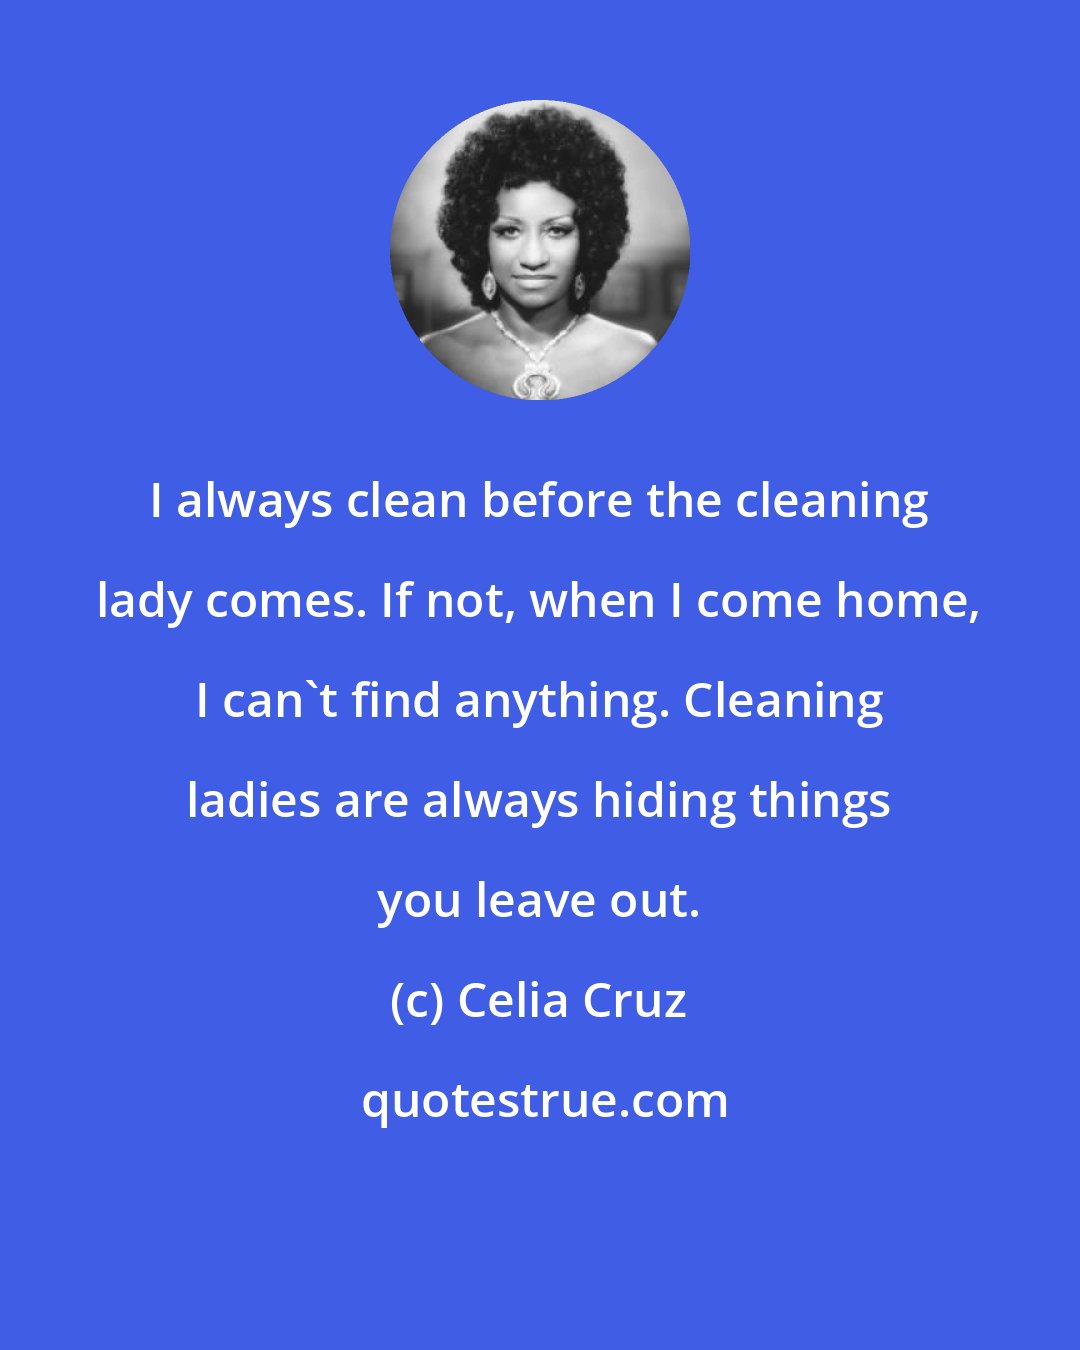 Celia Cruz: I always clean before the cleaning lady comes. If not, when I come home, I can't find anything. Cleaning ladies are always hiding things you leave out.